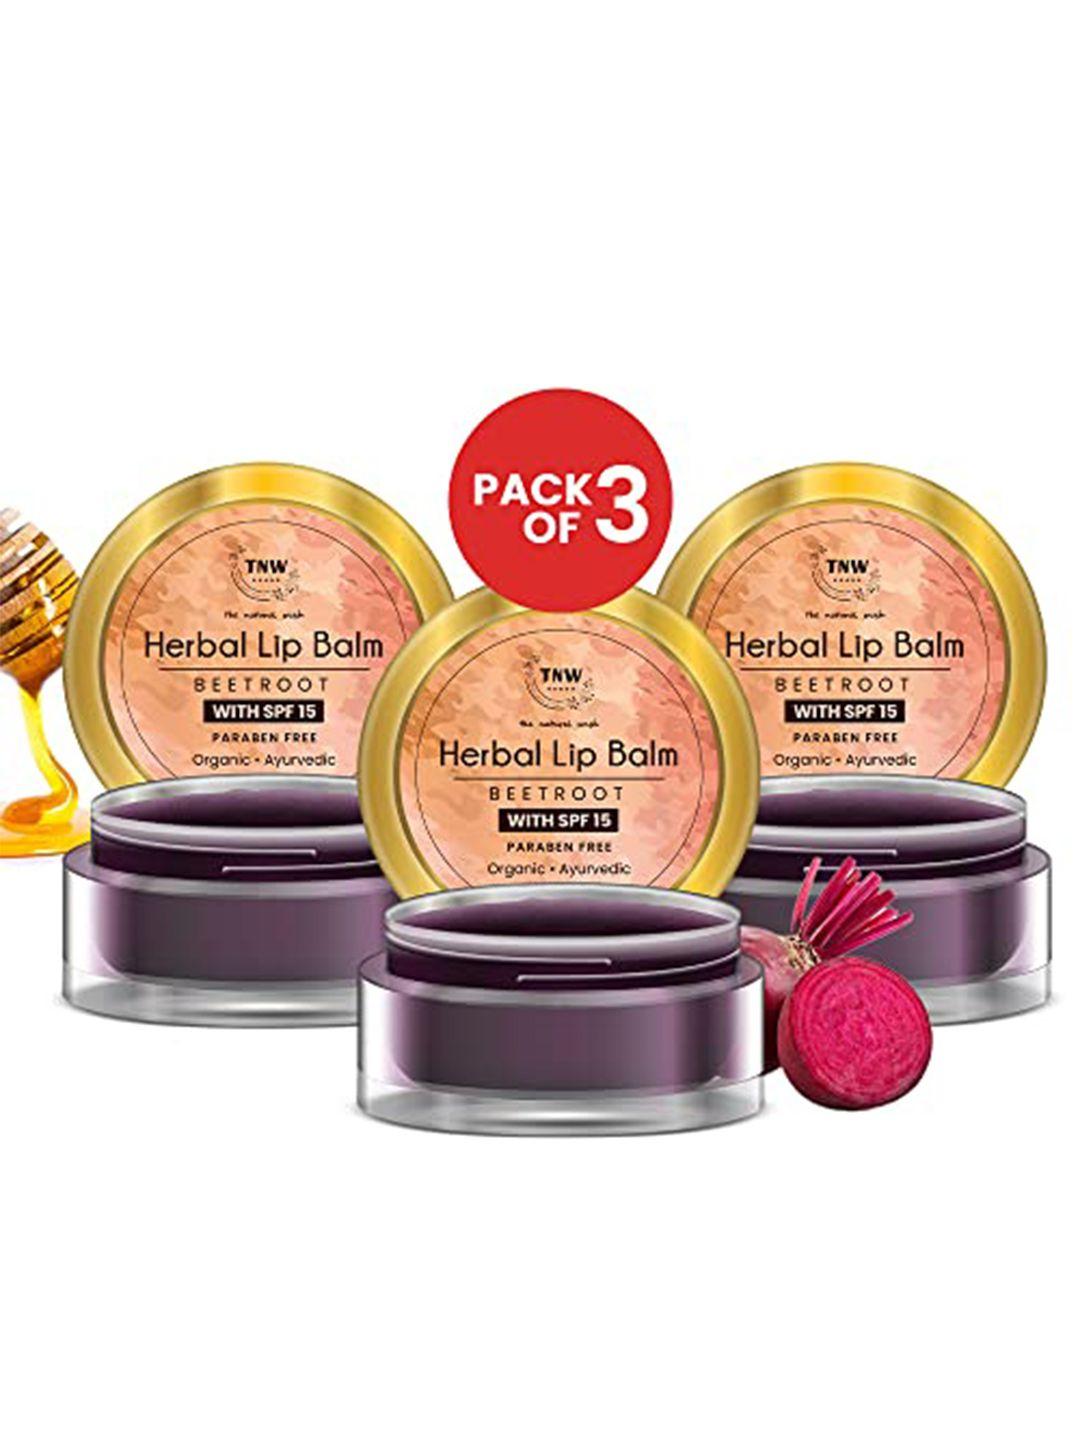 tnw the natural wash set of 3 herbal beetroot spf 15 lip balm 15g